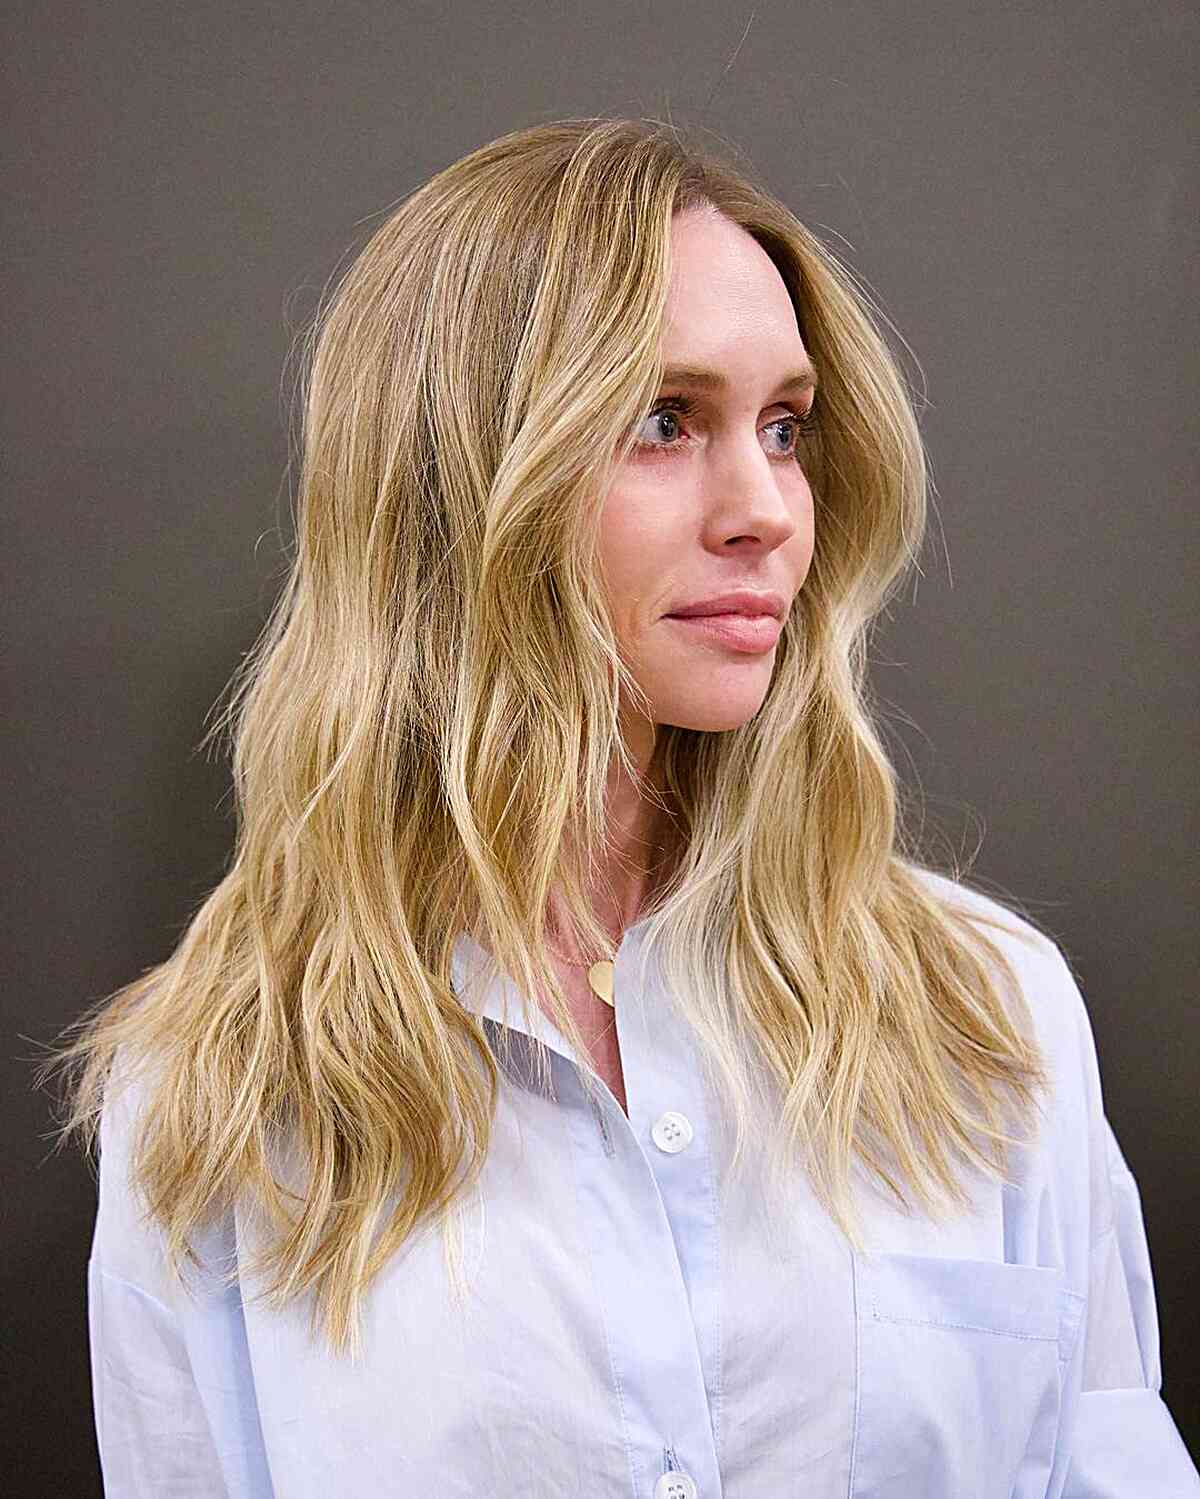 Casual Fresh Summer Cut for women with long blonde hair